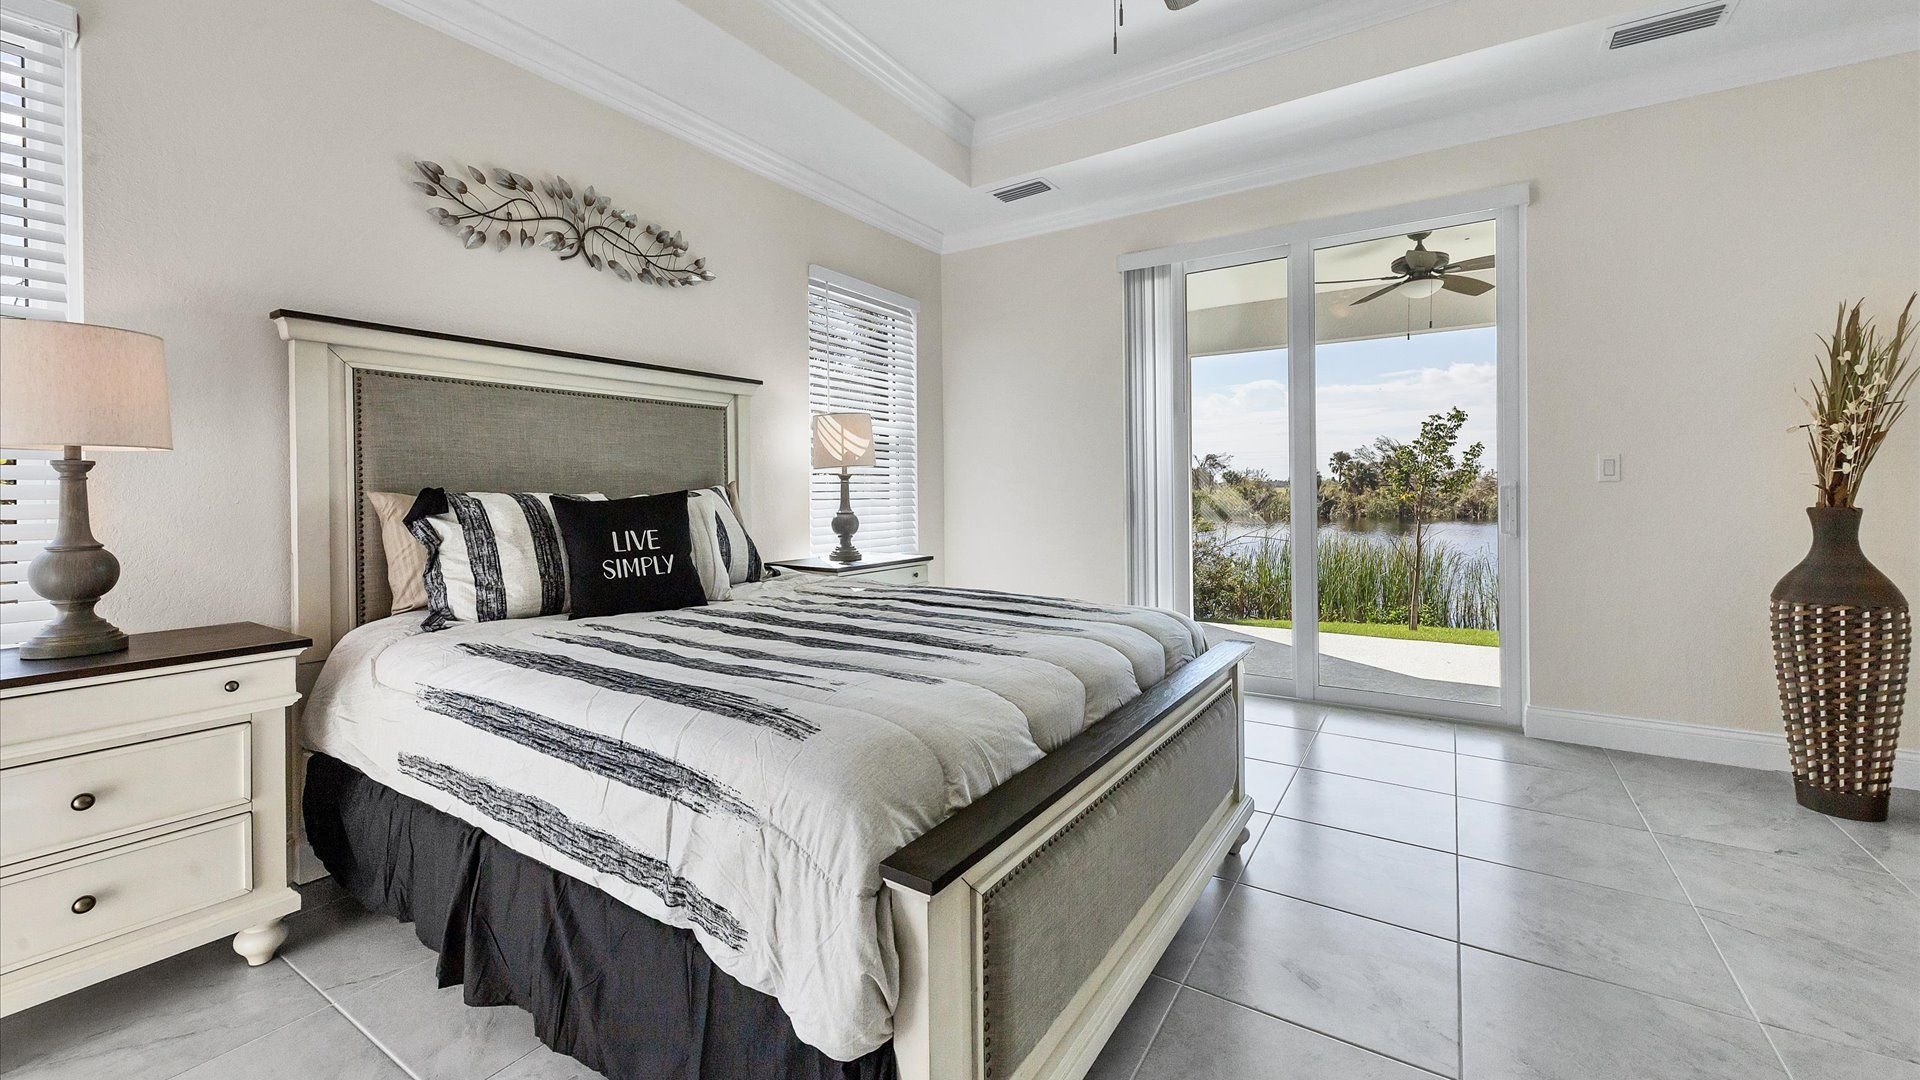 Queen master bedroom with ensuite bathroom and lanai access